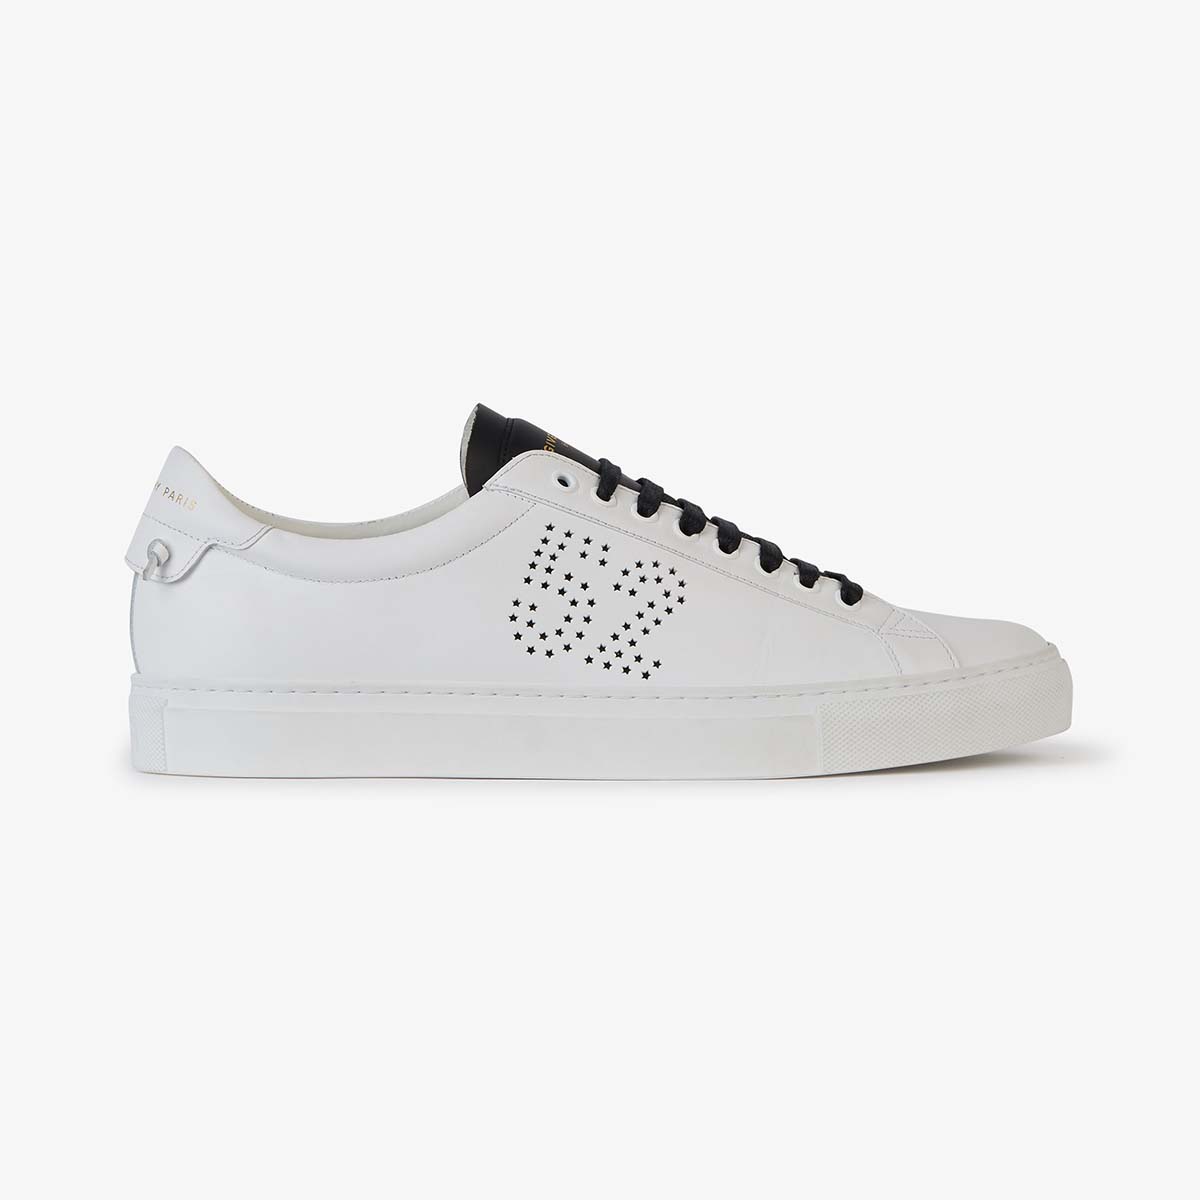 Givenchy Men 1952 Perforated Sneakers Shoes White